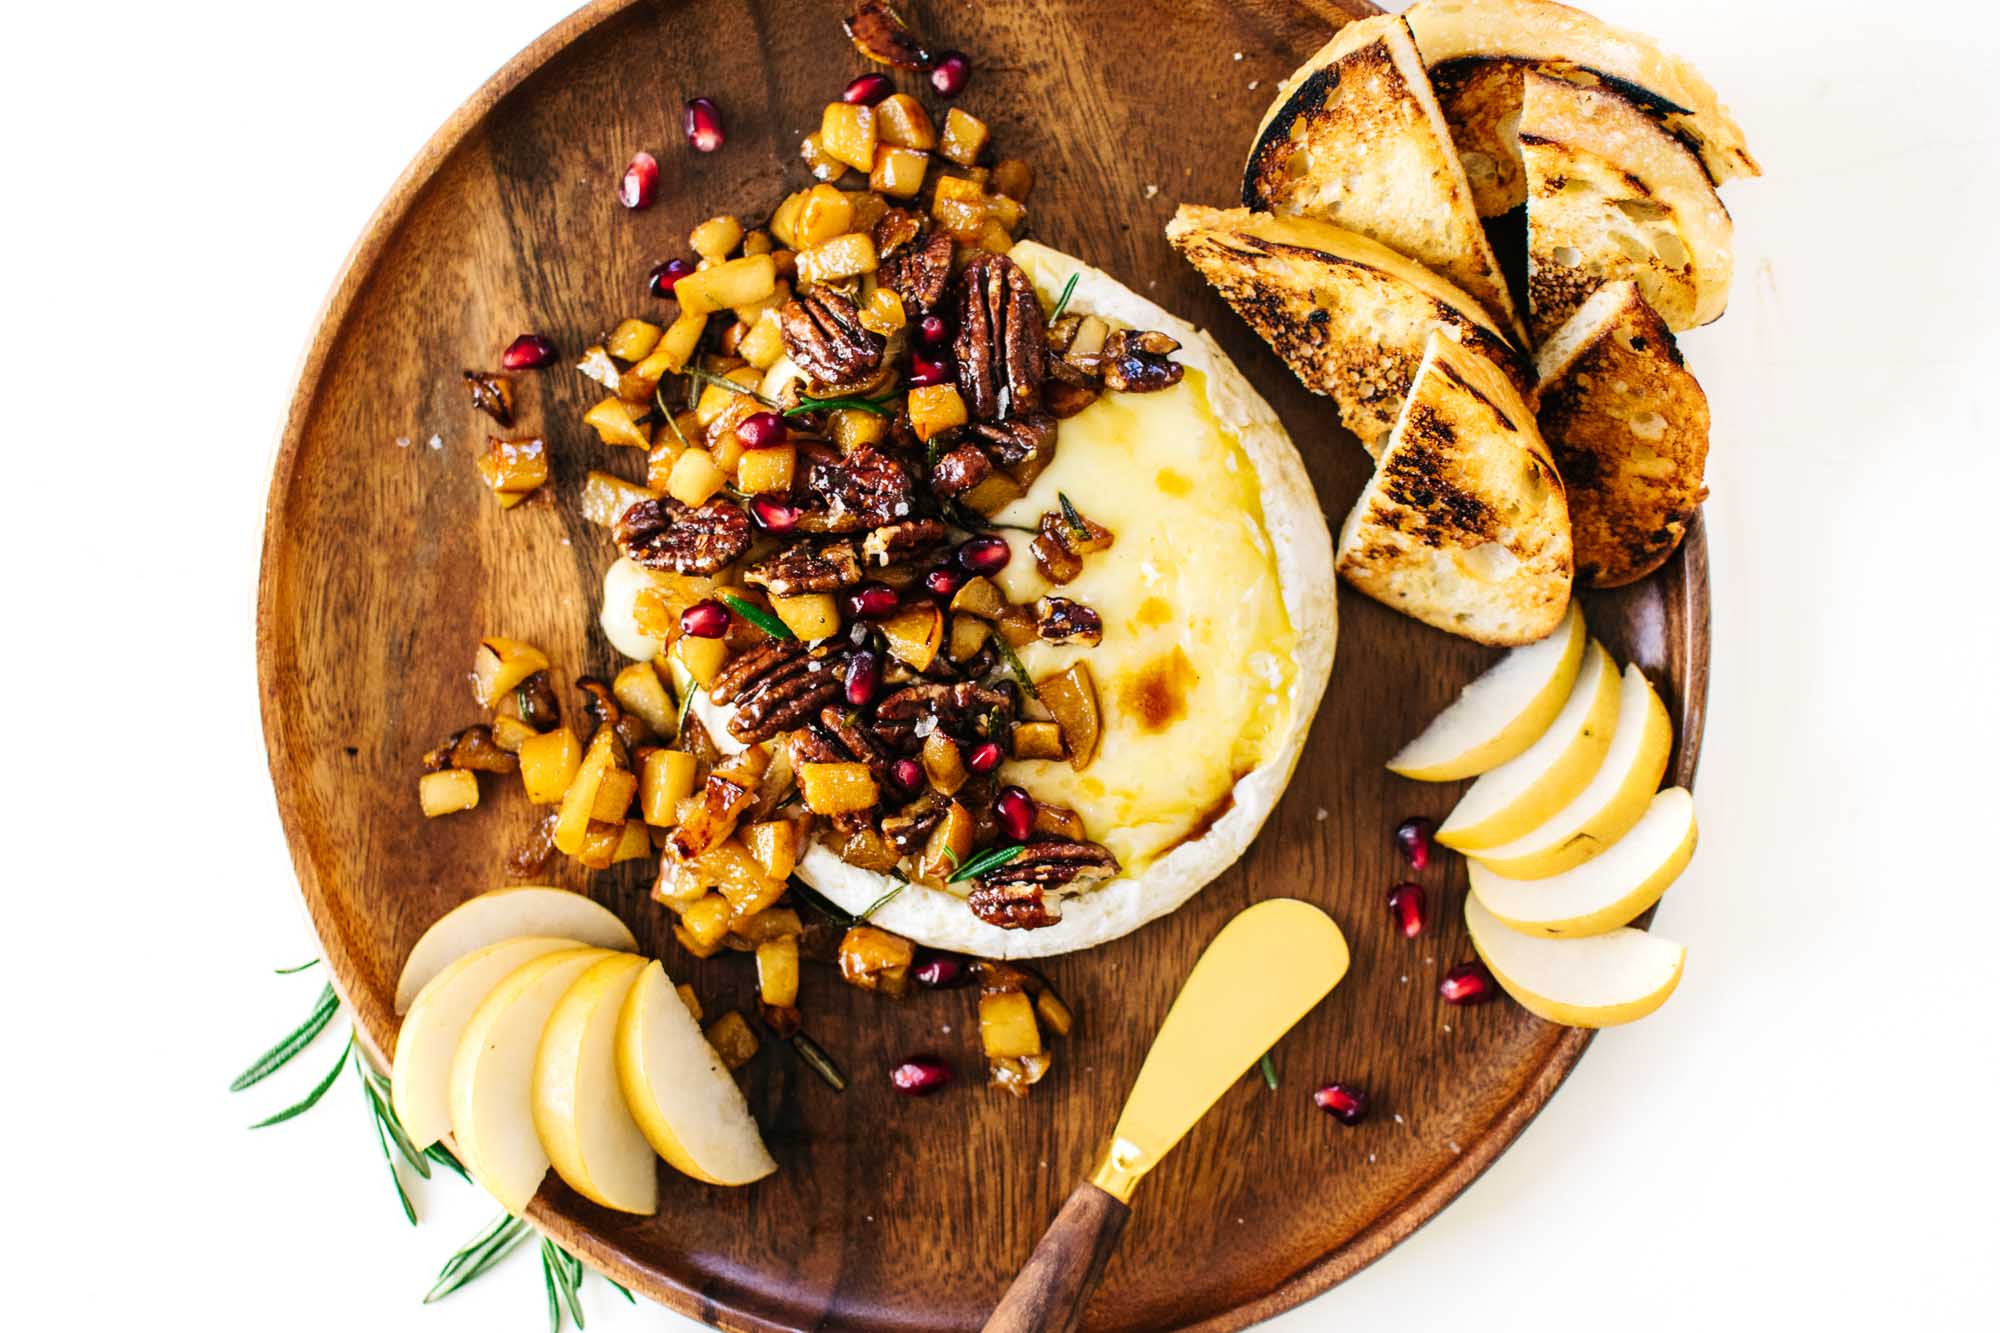 Maple-Rosemary Pear & Pecan Baked Brie